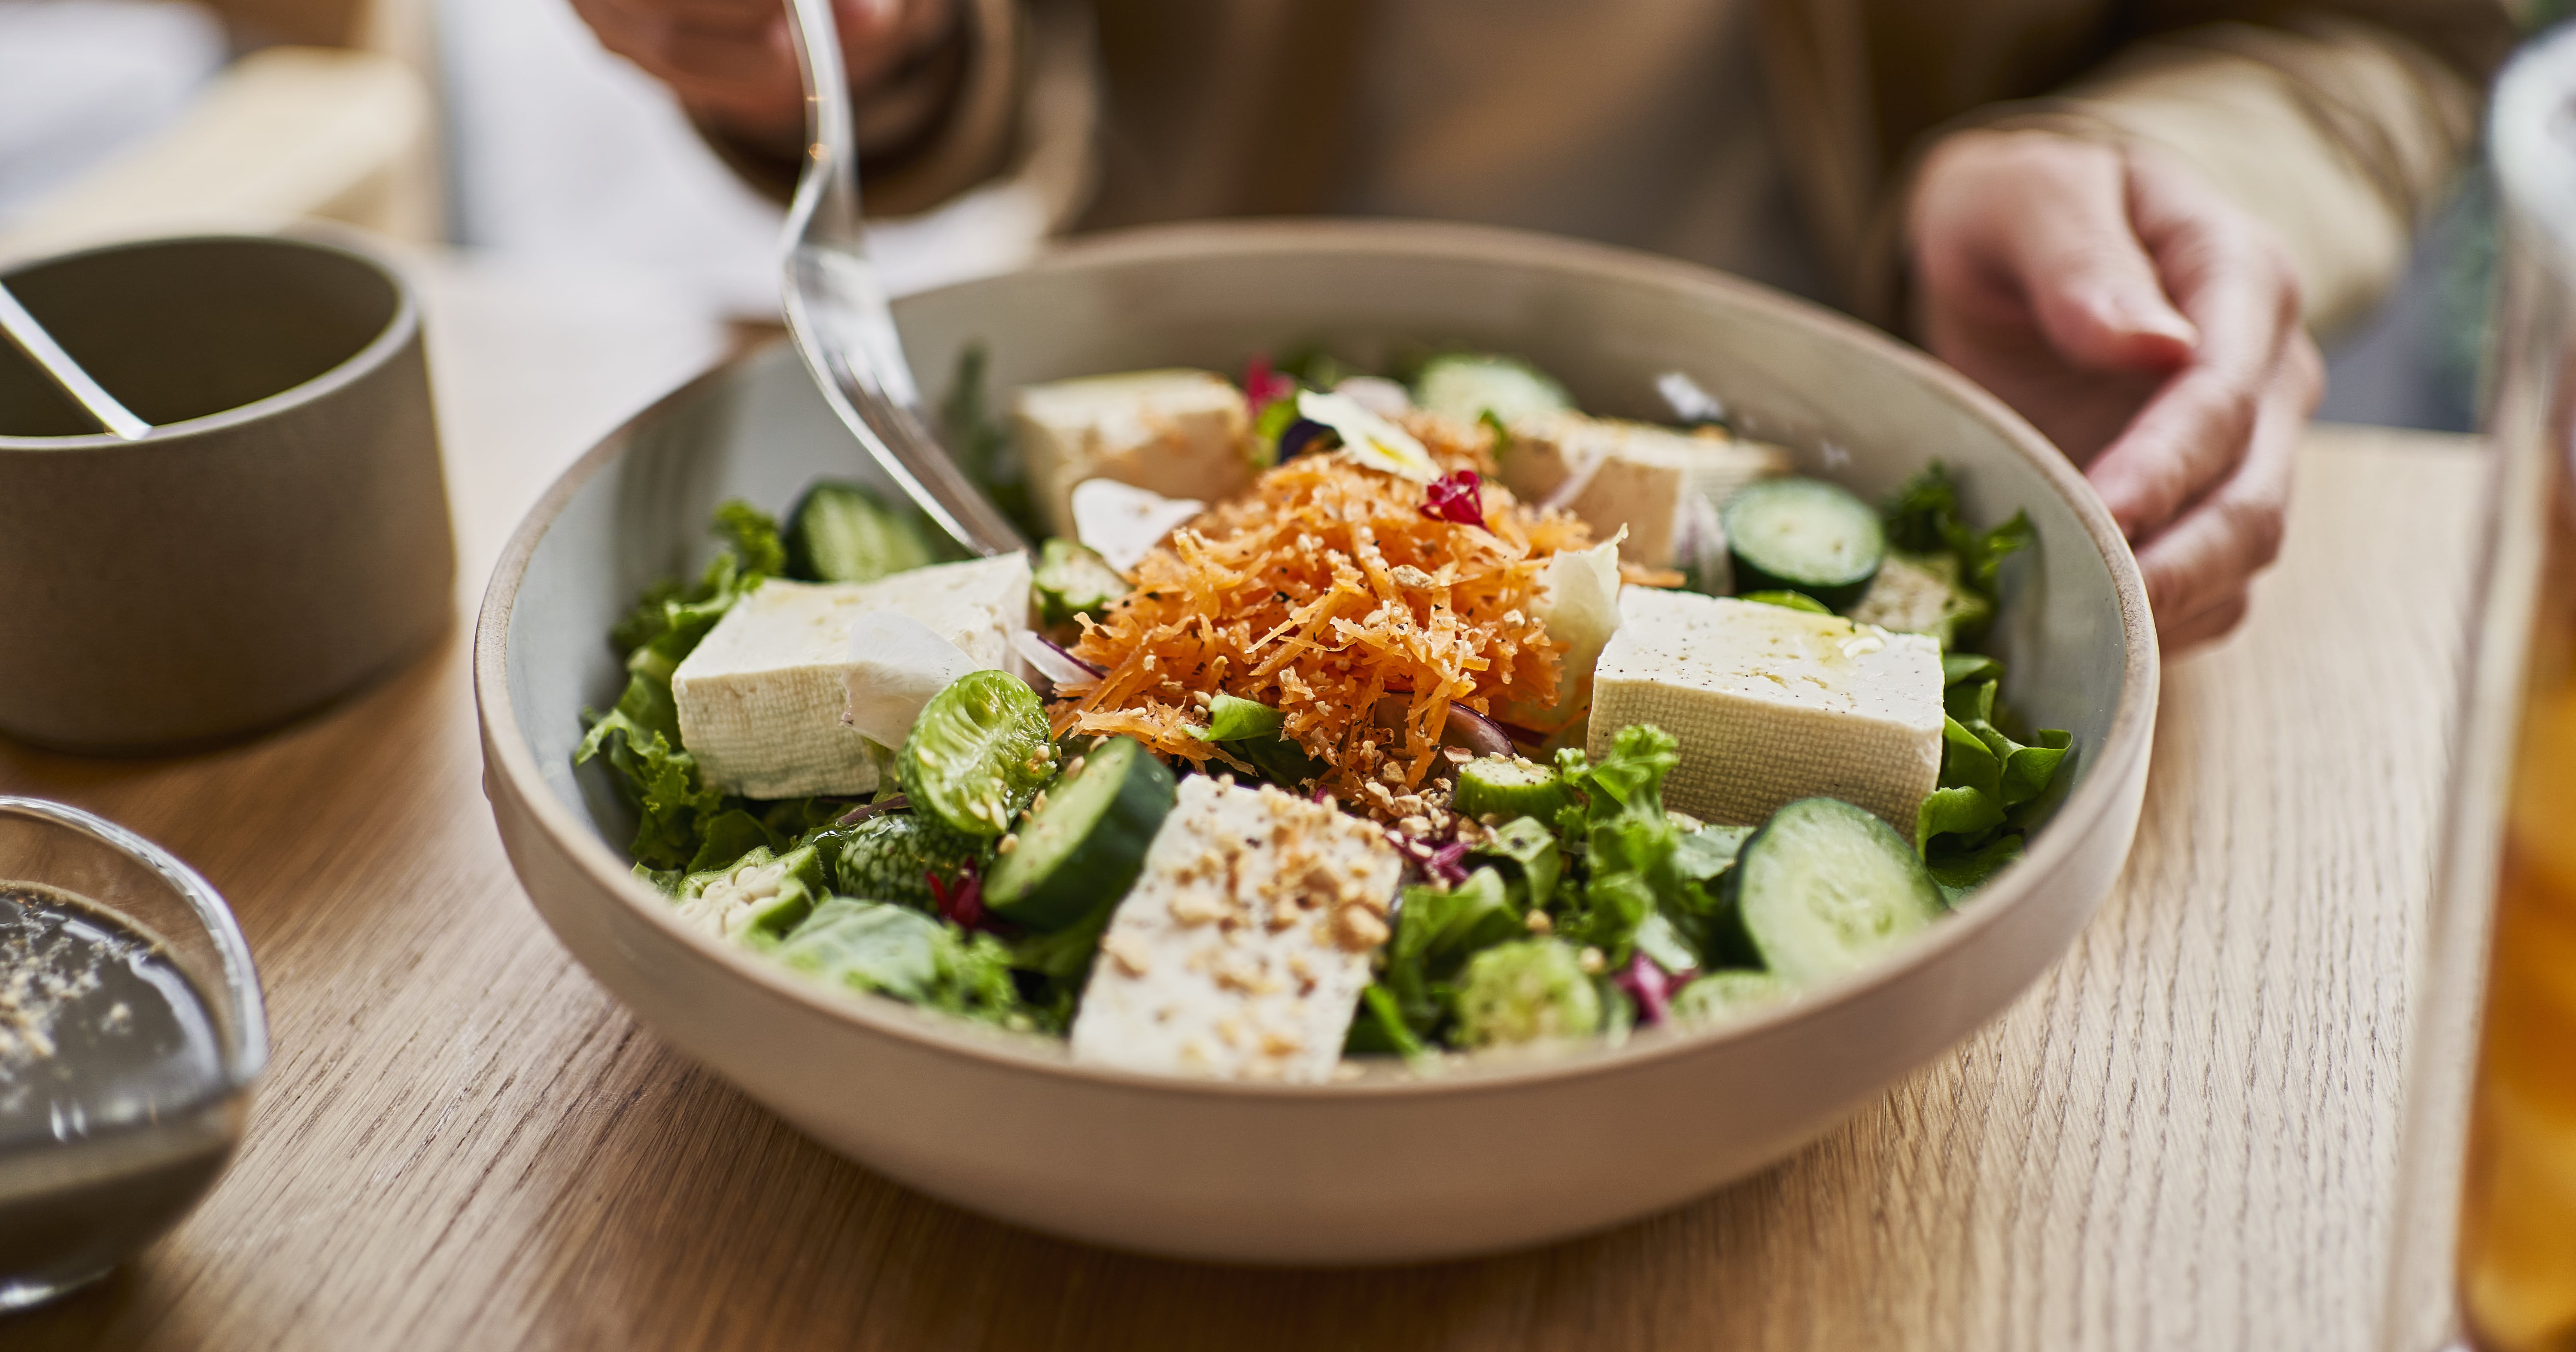 Is Tofu Actually a Good Source of Protein? We Asked RDs